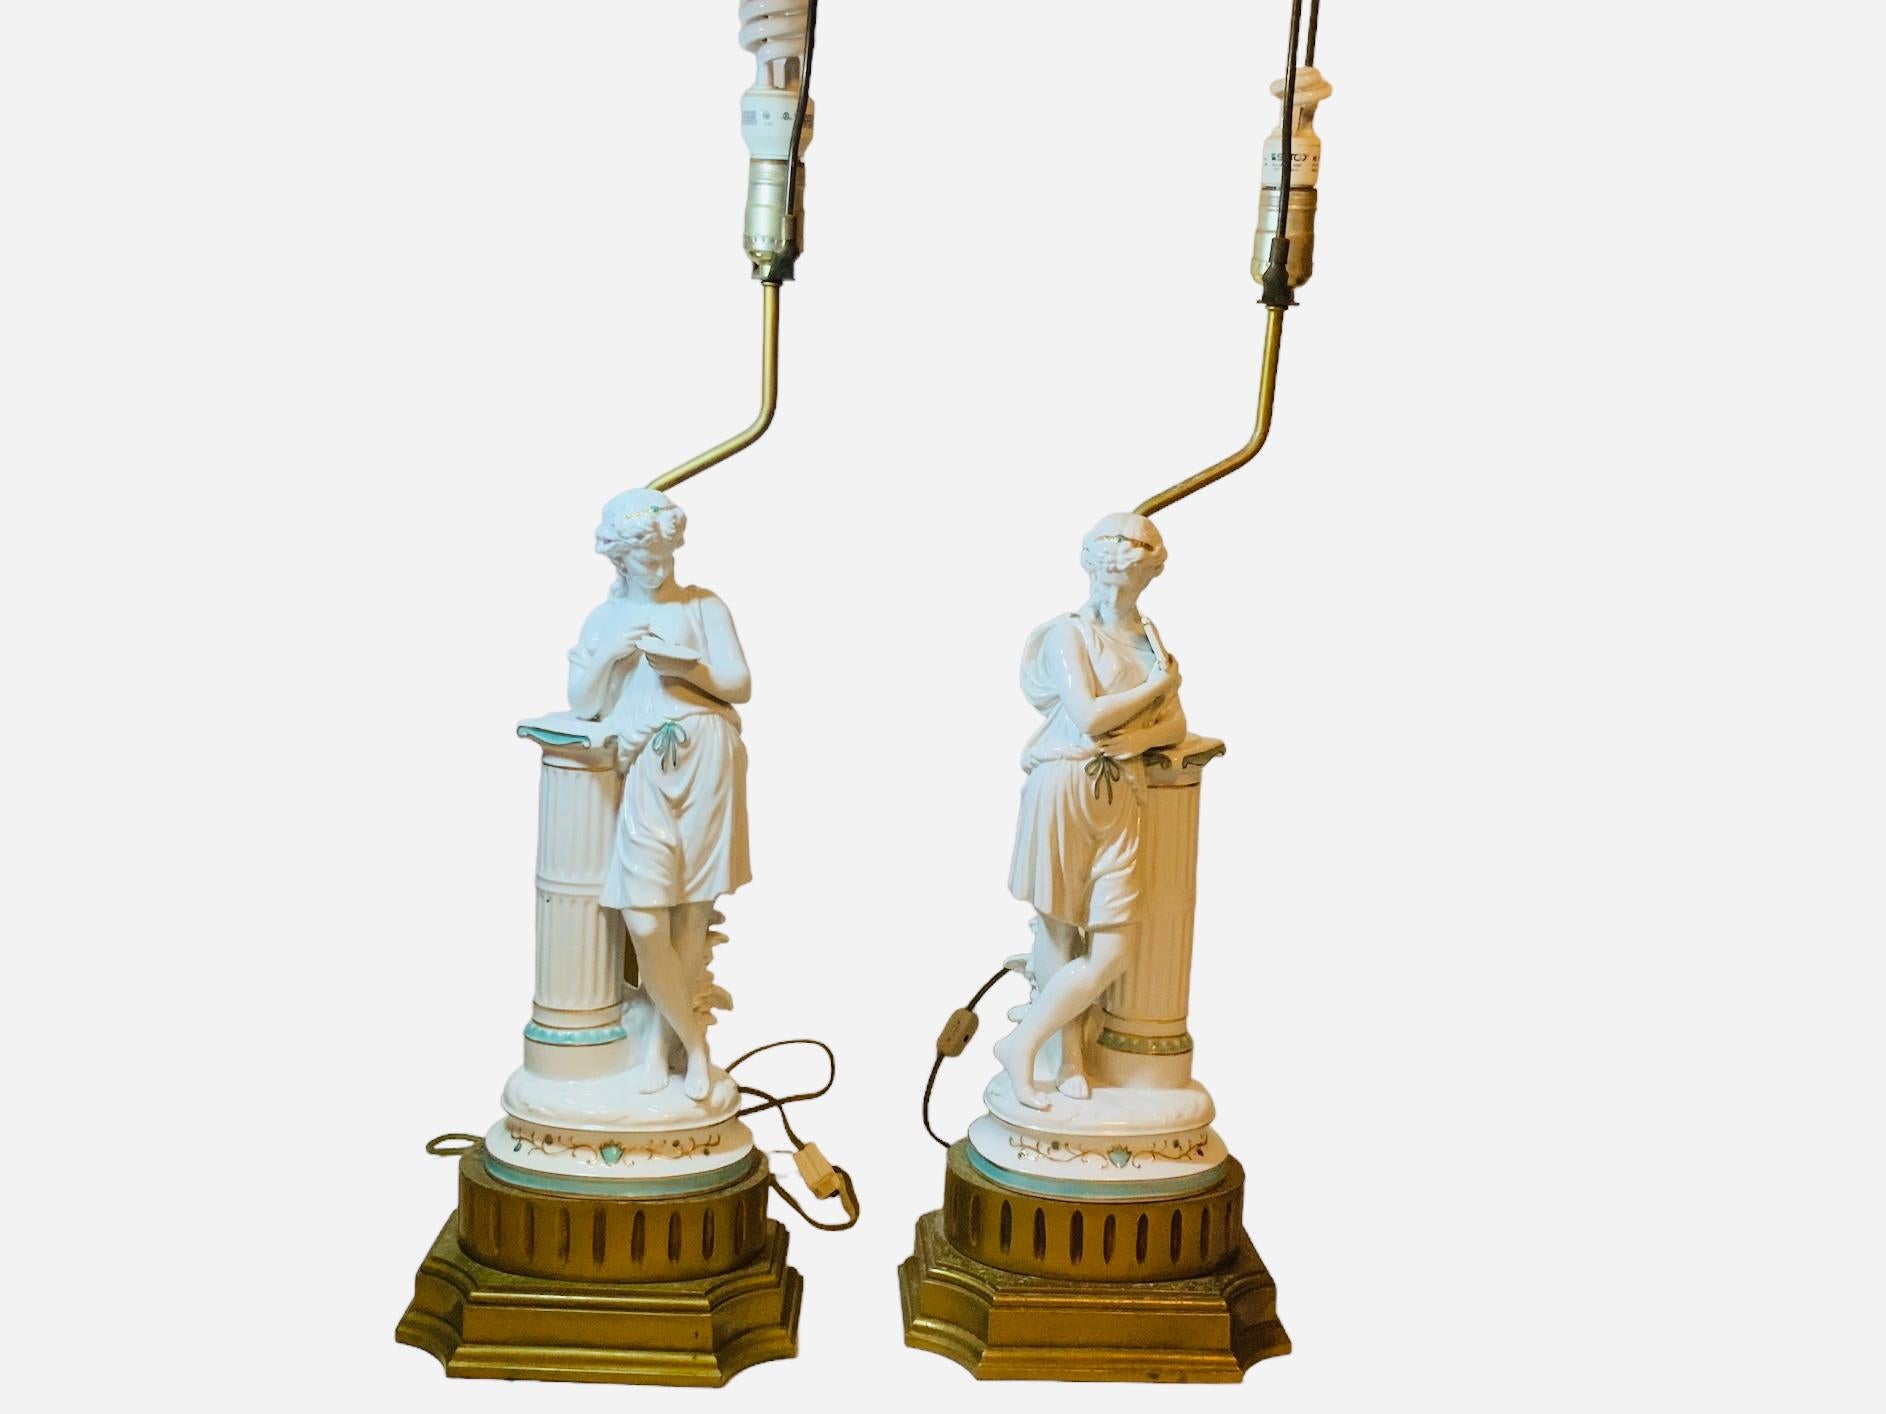 Minton Porcelain Pair Of Greek/ Roman Figures Sculptures Table Lamps In Good Condition For Sale In Guaynabo, PR